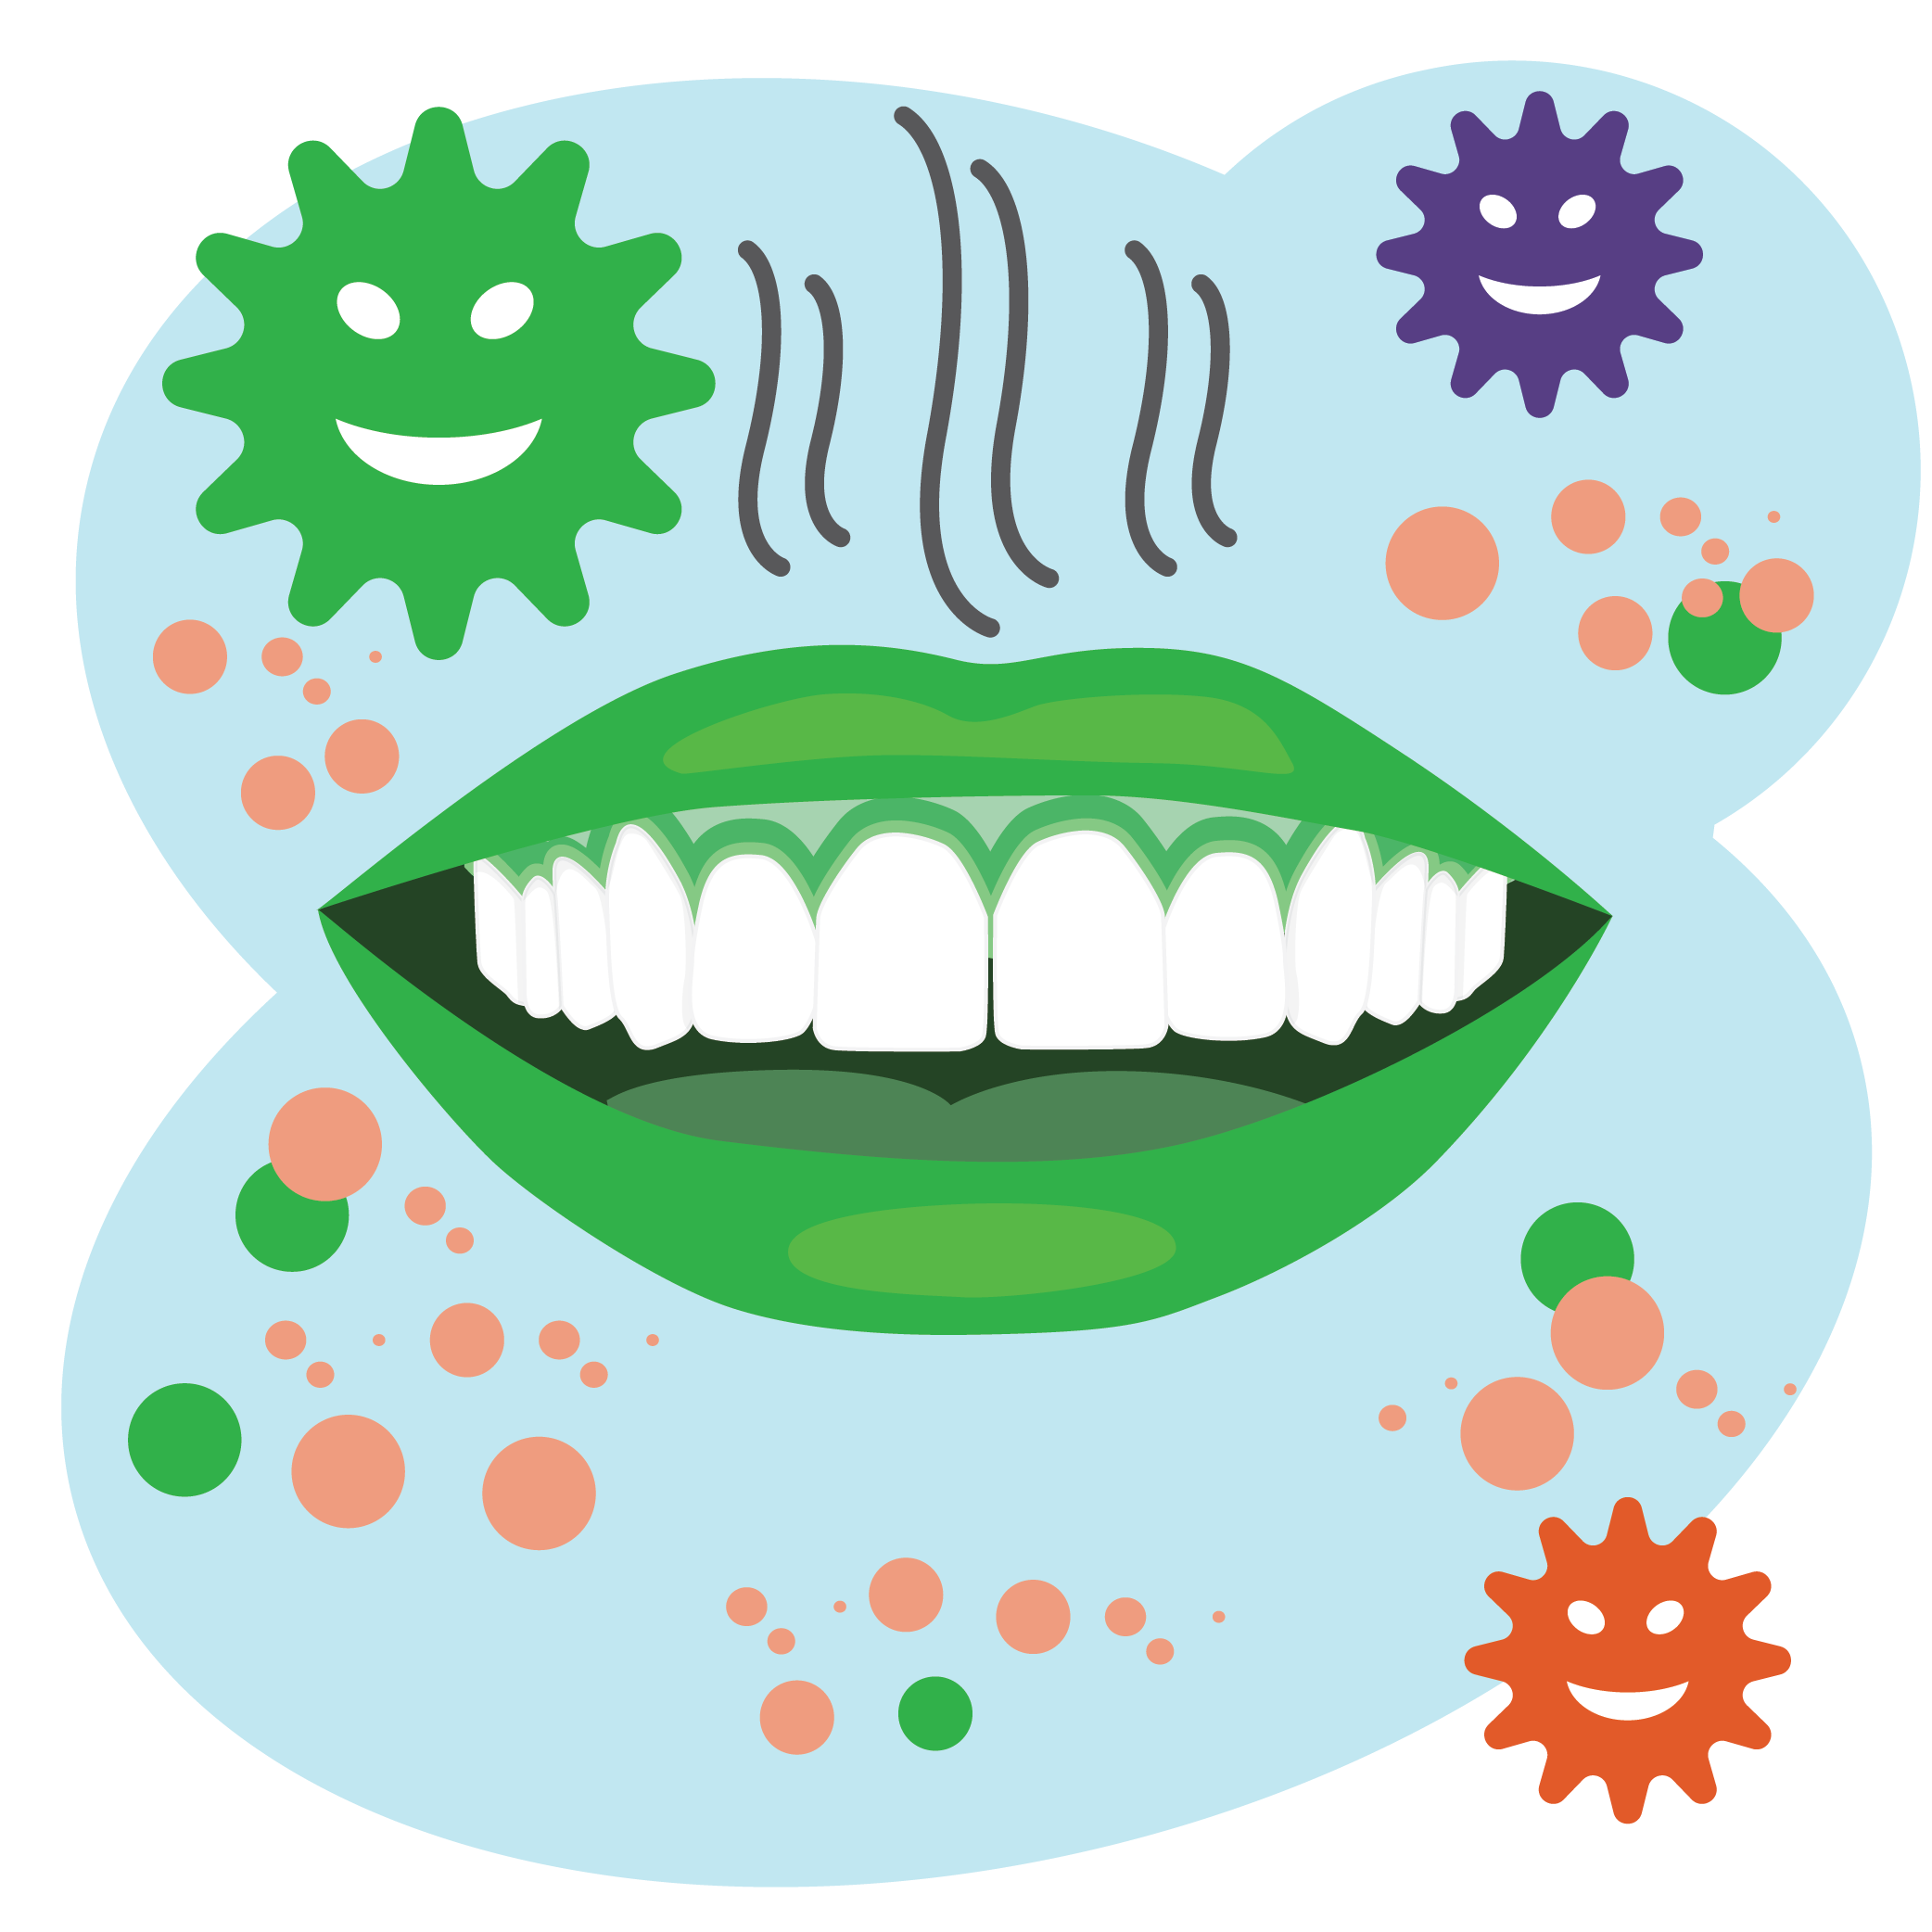 Illustration of a smiling mouth with different colored spots and germ shapes around it along with smell lines to indicate bad breath